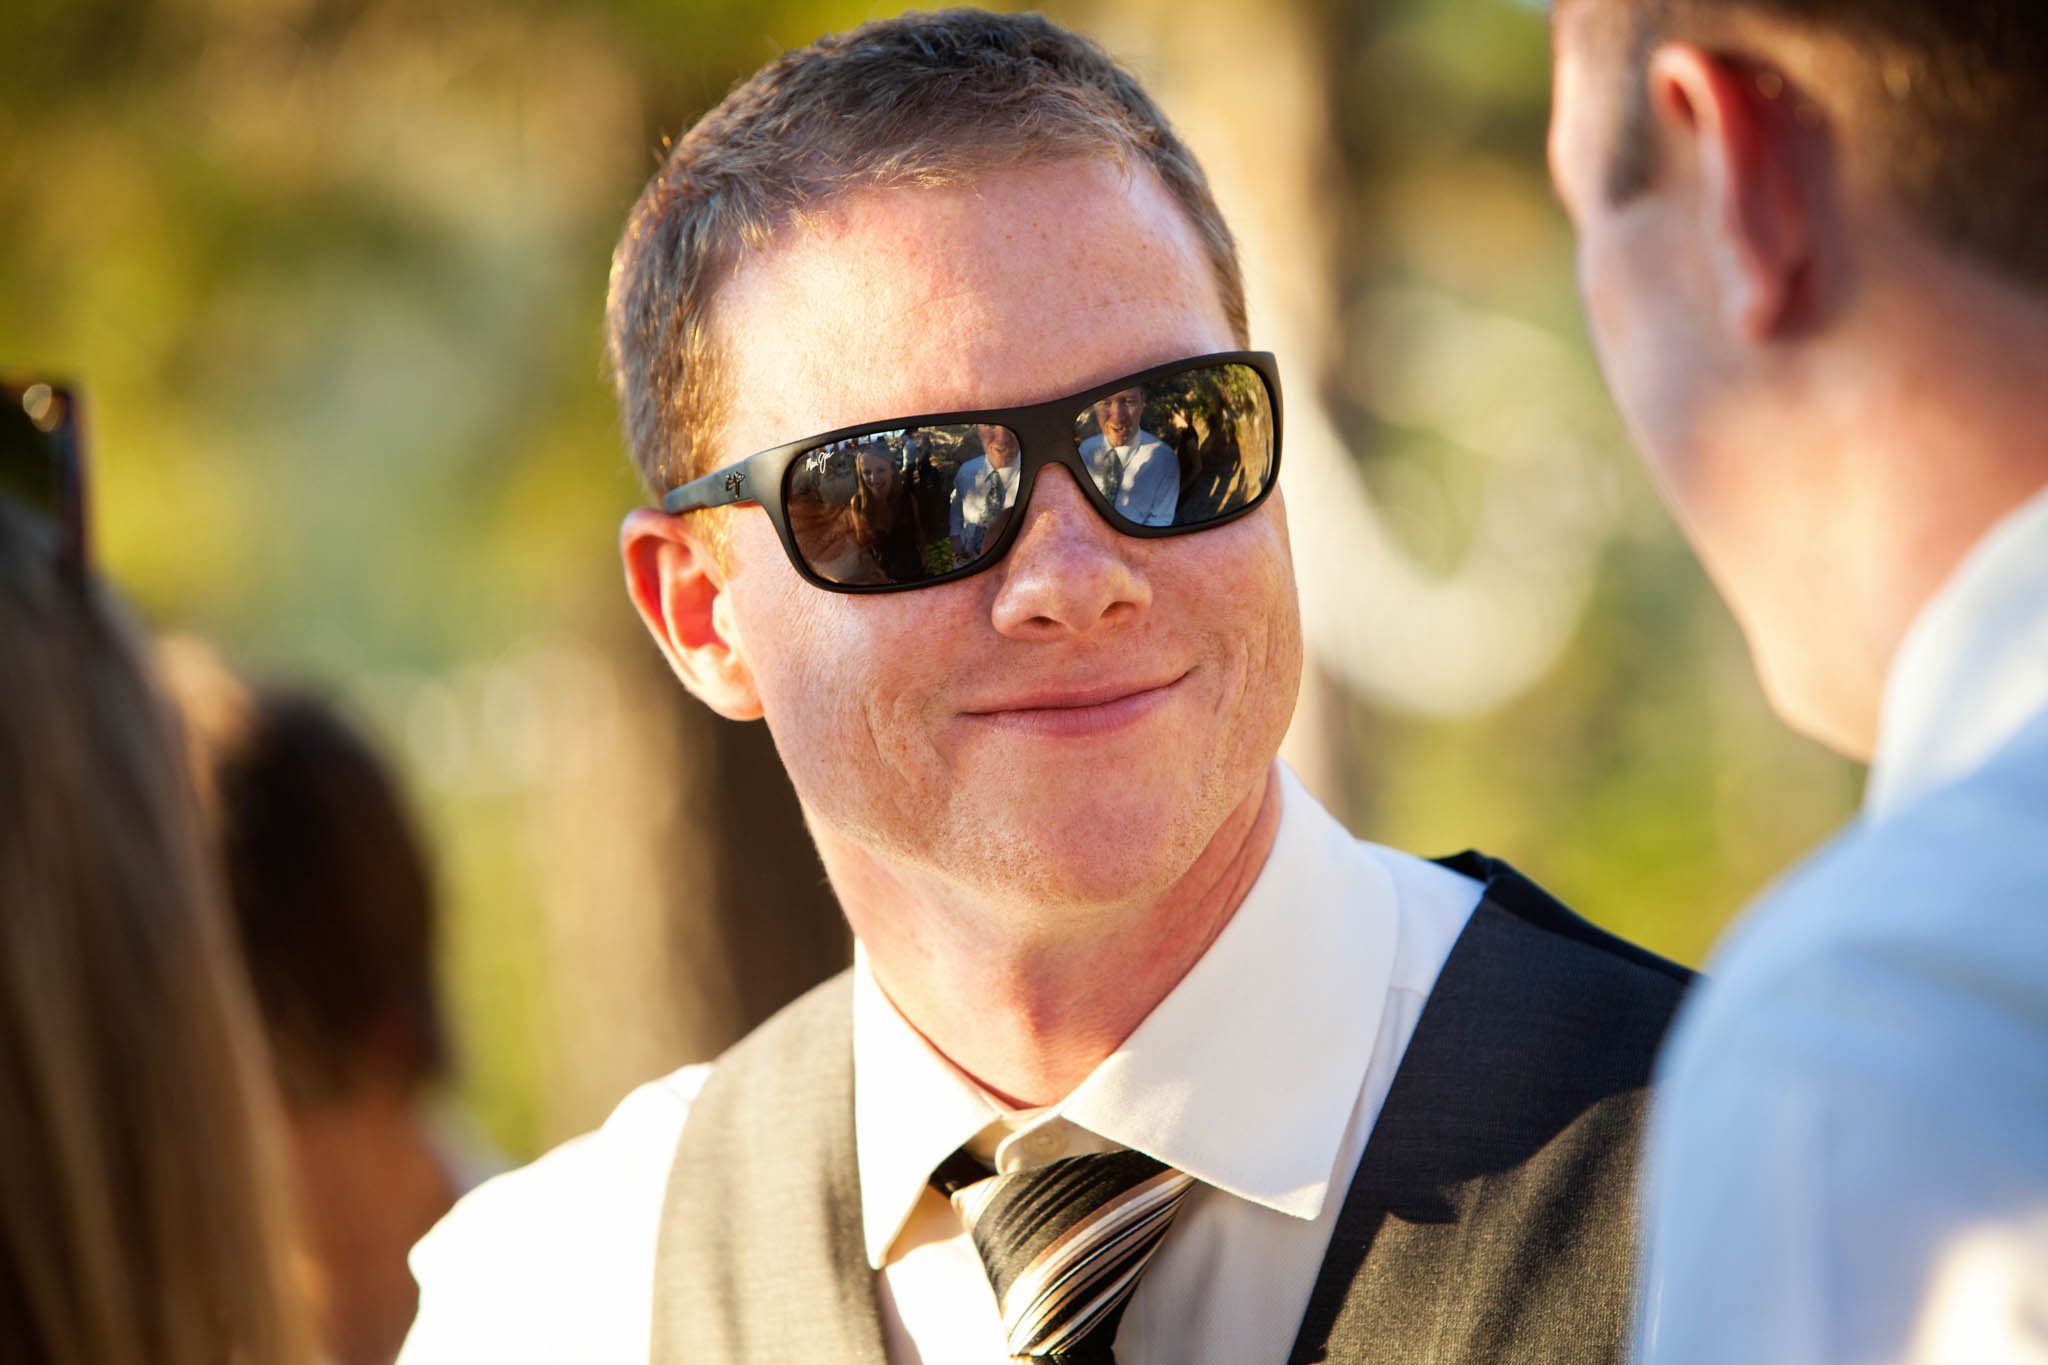 candid portrait of groom – North Lake Tahoe Incline Village wedding photography